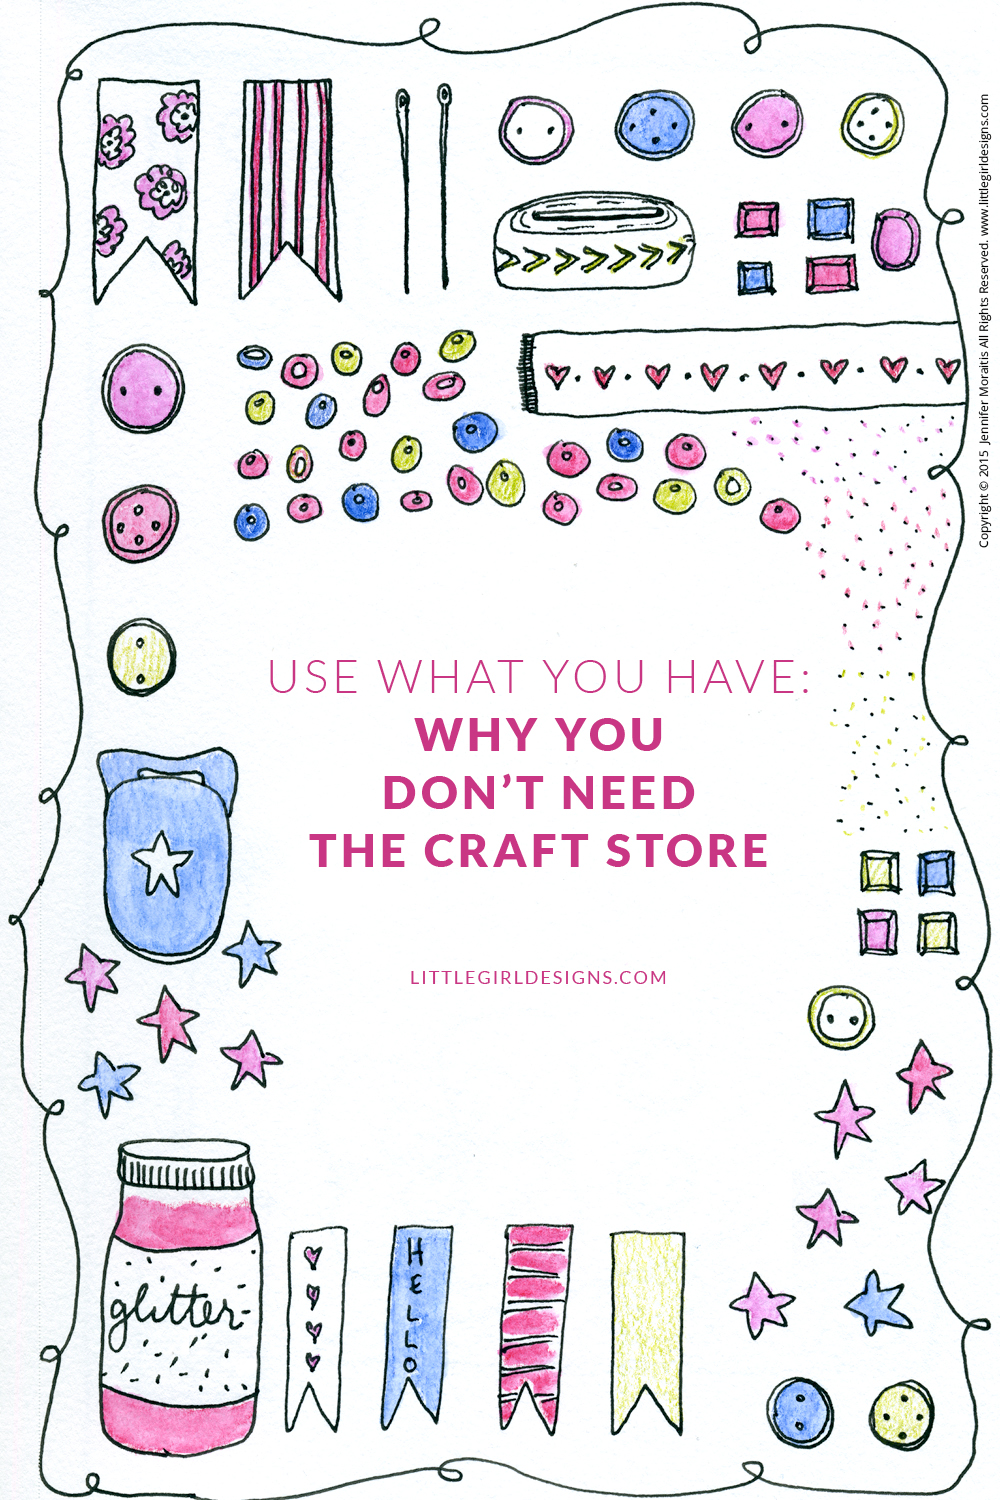 Use What You Have: Why You Don’t Need the Craft Store